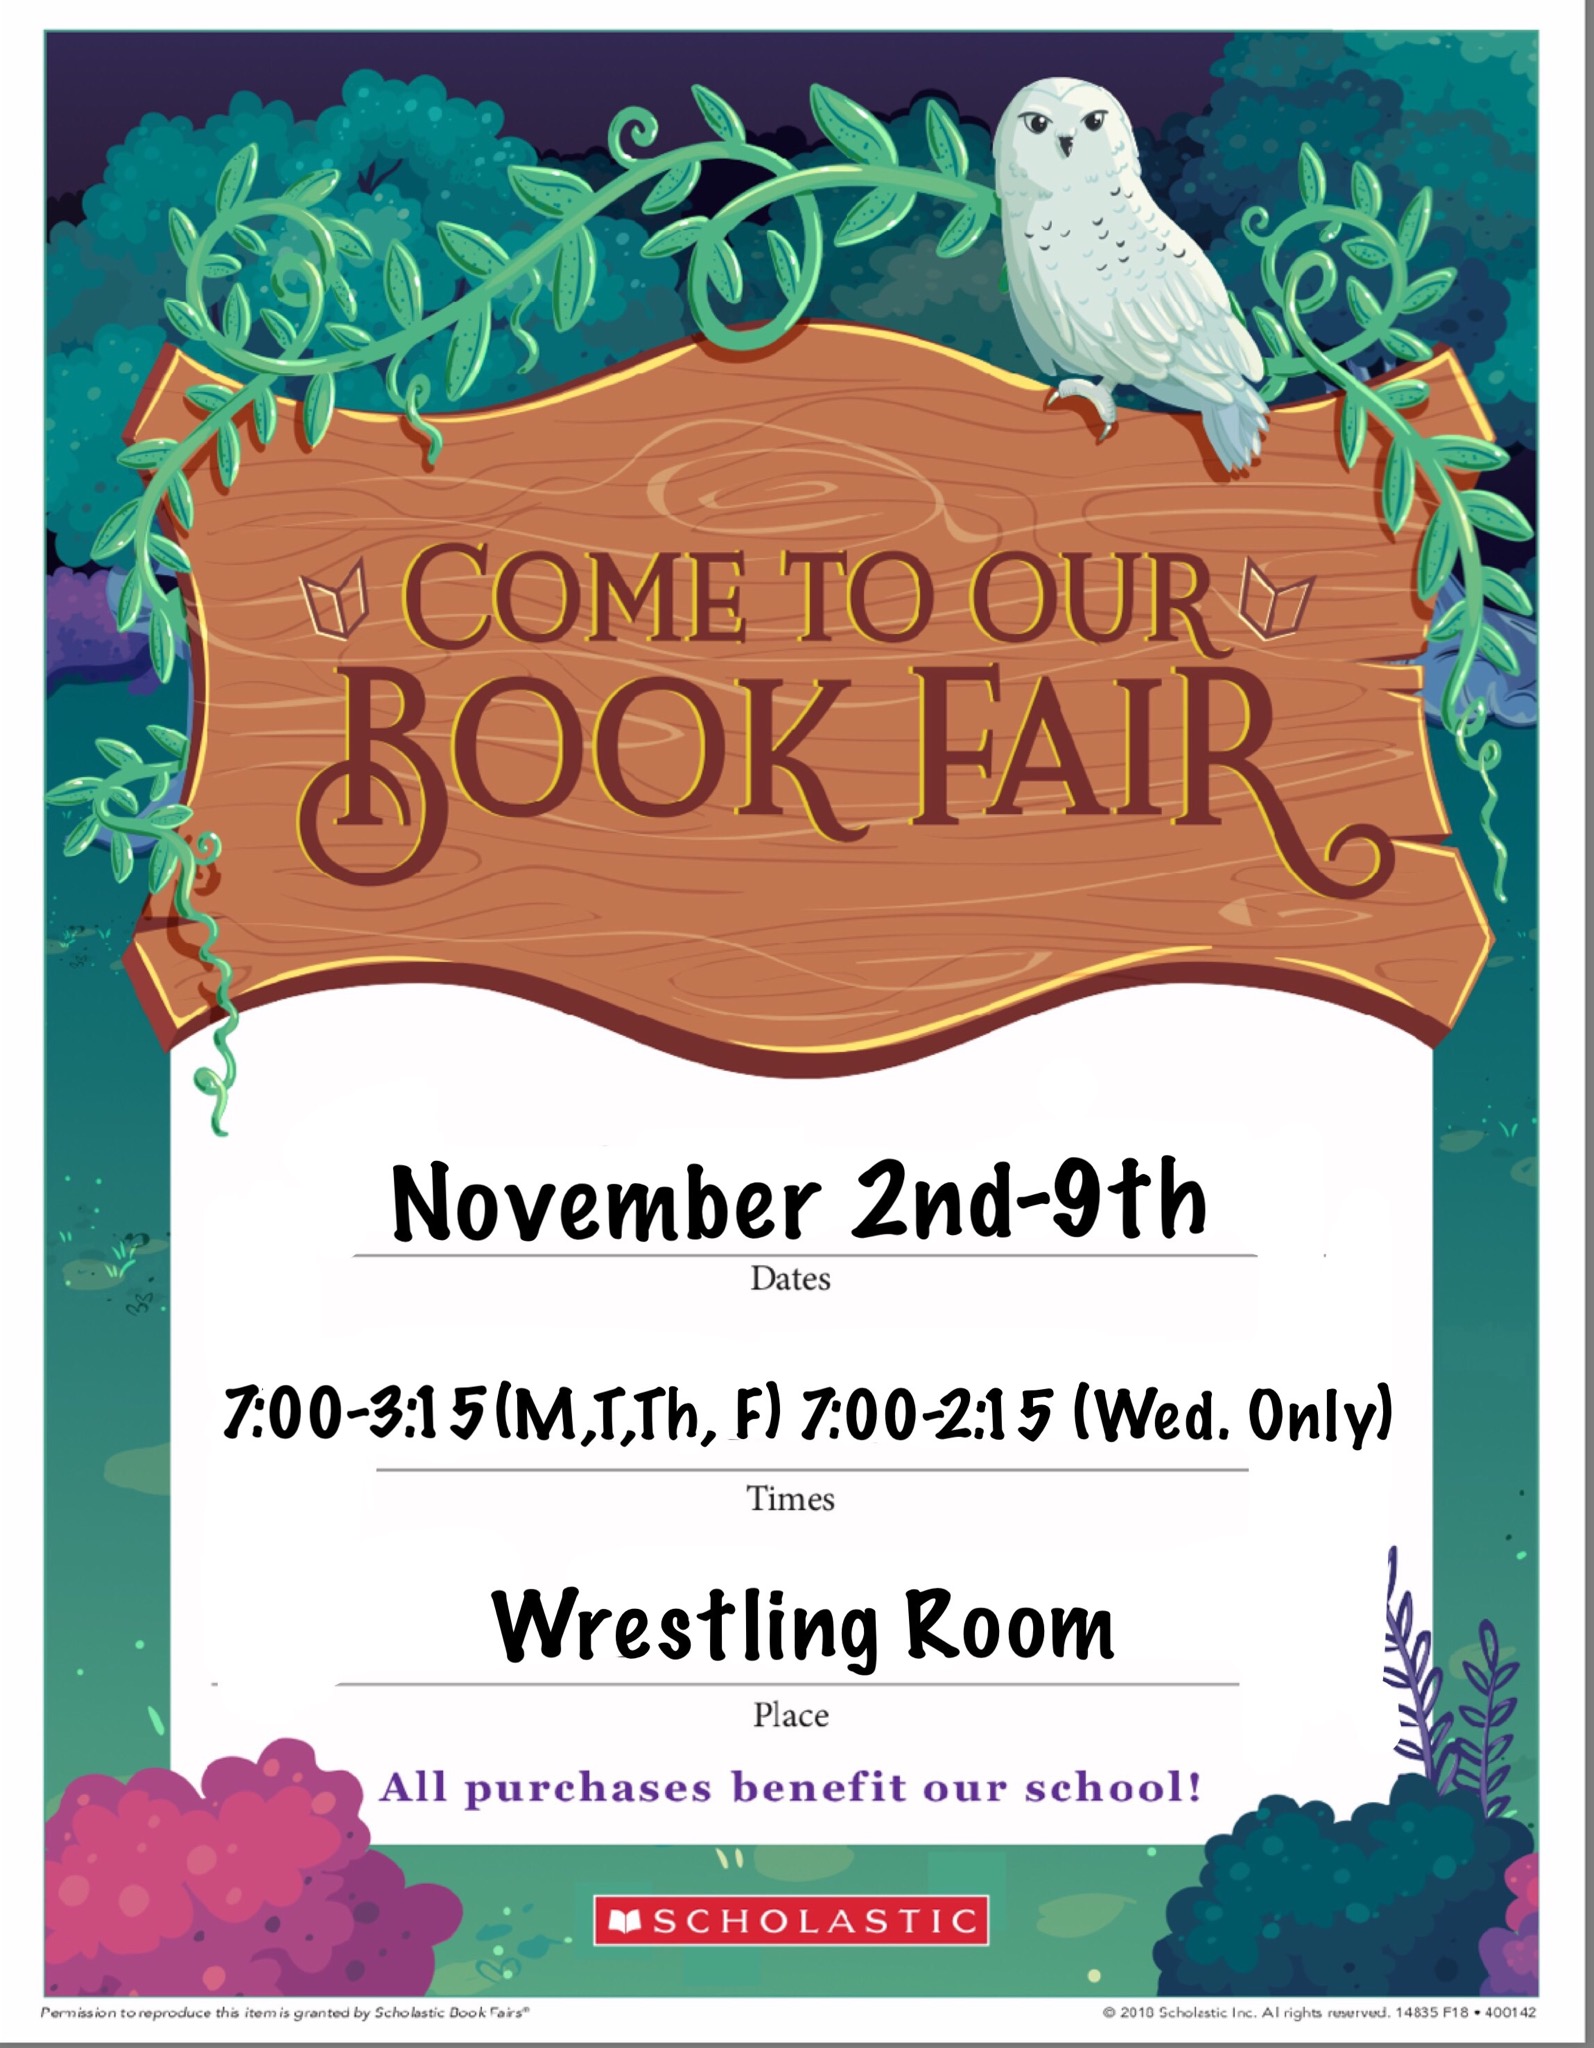 Book Fair dates: November 2nd -November 9th Shopping hours: 7am-3:15pm (M, T, Th, F) 7am-2:00pm (Wed. only) Special activities: Literacy Night on November 8th 4:30-6:30